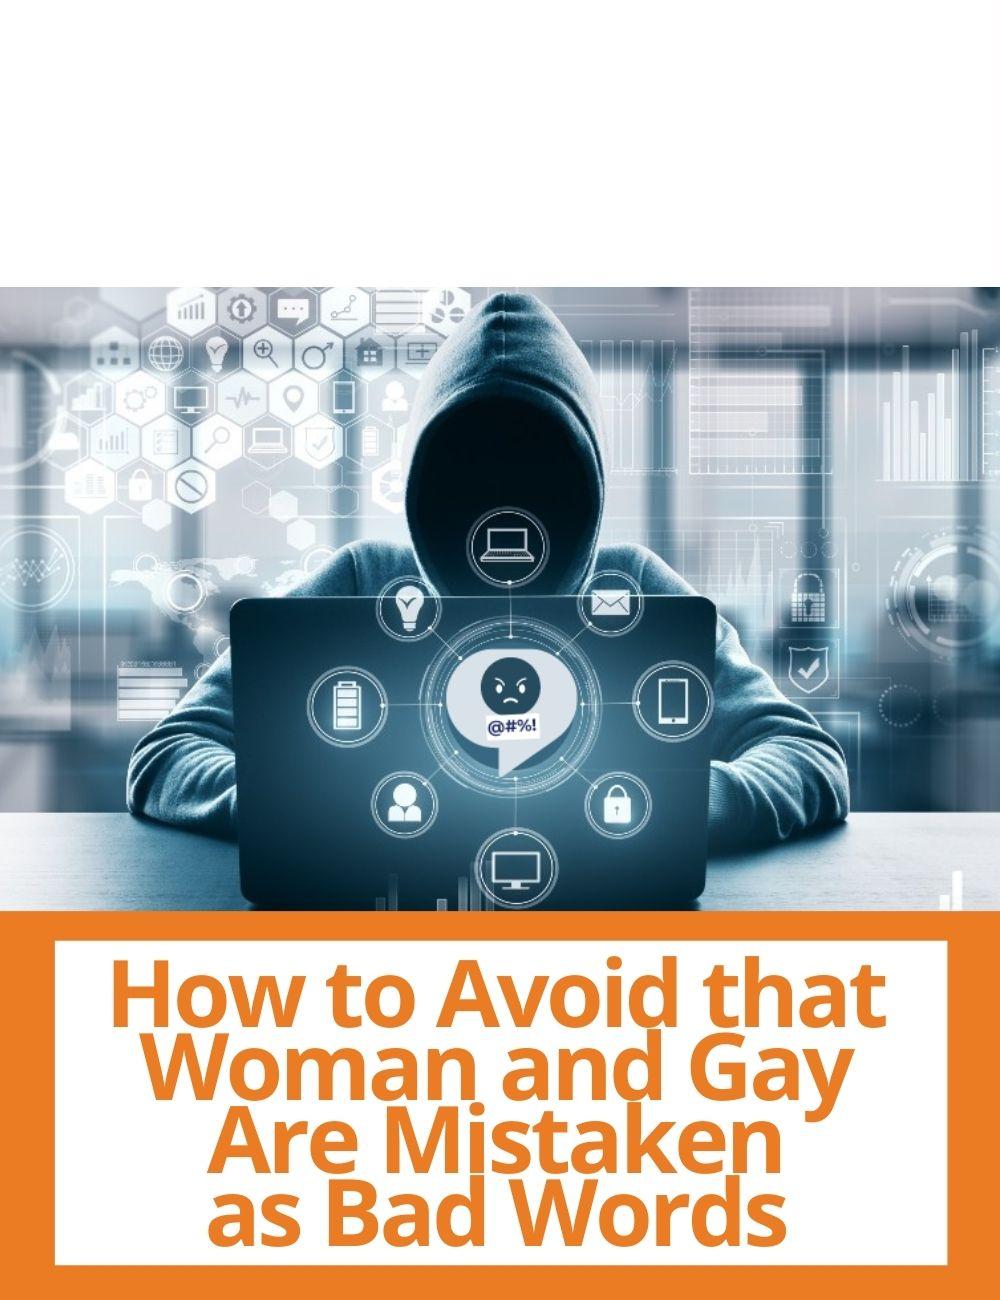 Link to related stories. Image: a hooded person and symbols recalling cyber bullying. Story headline: Machines Get It Wrong: How to Avoid that Woman and Gay Are Mistaken as Bad Words